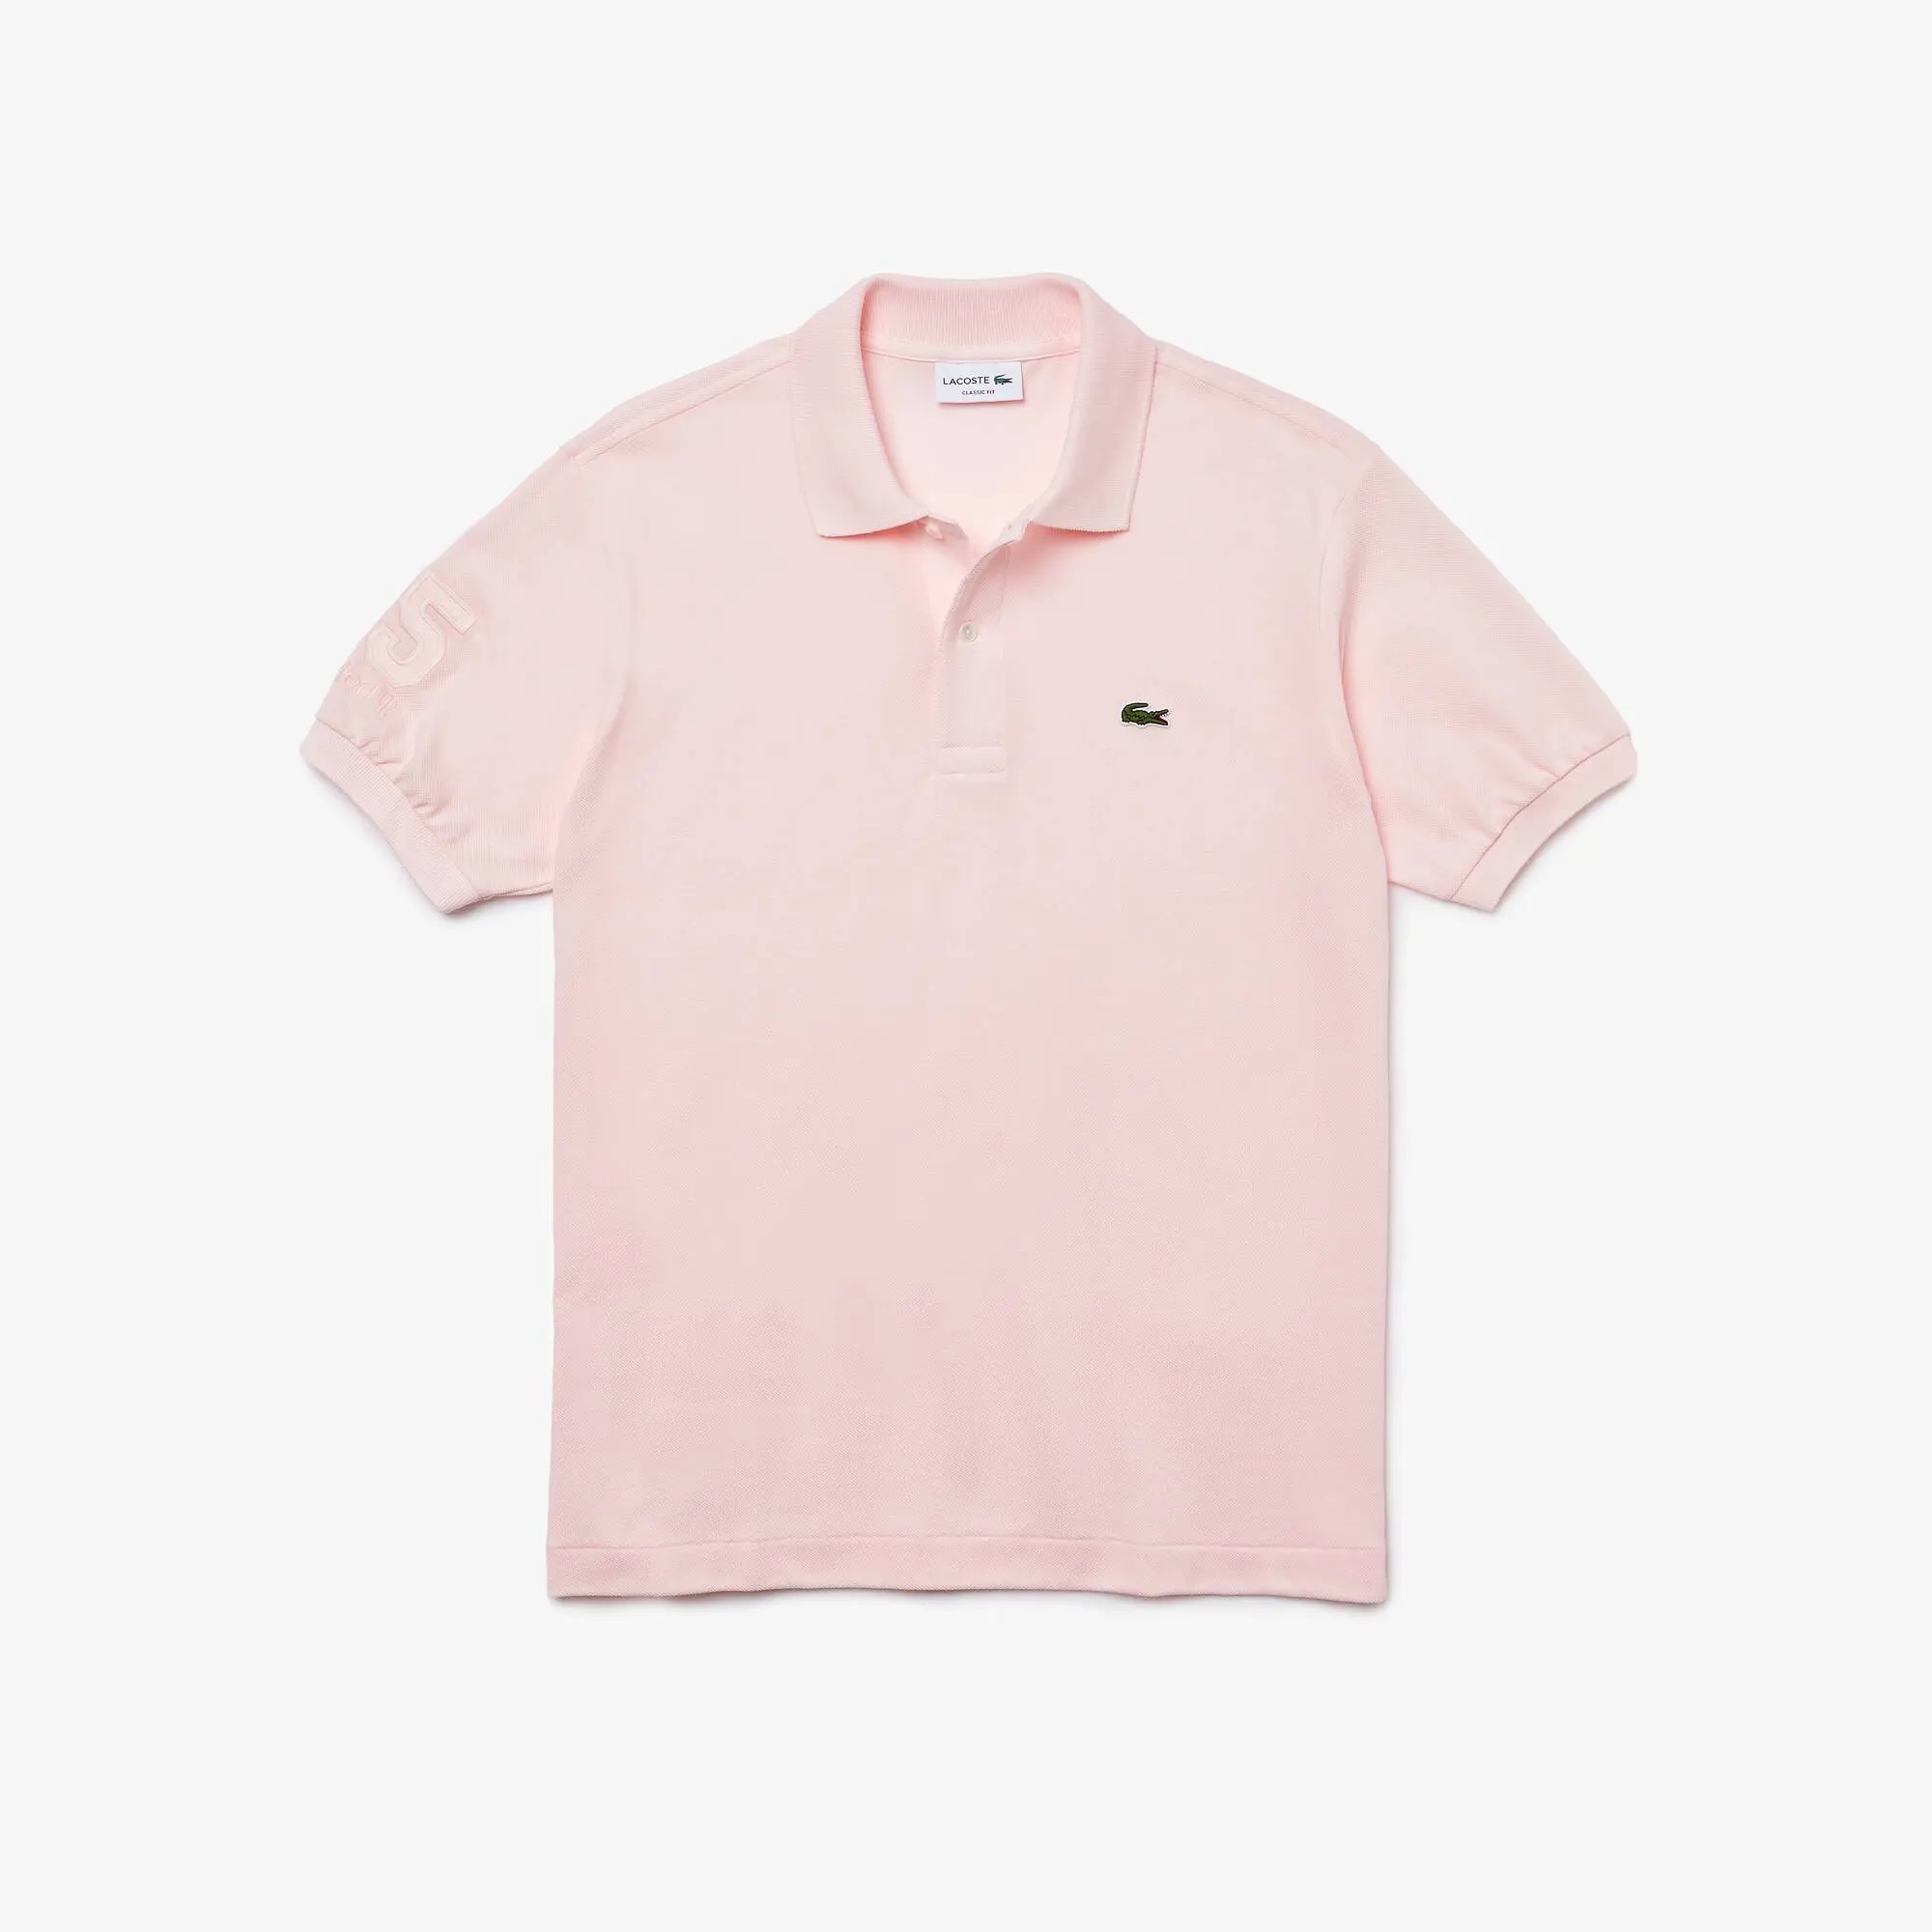 Lacoste Men's Lacoste Regular Fit Club Med Polo Shirt. 2